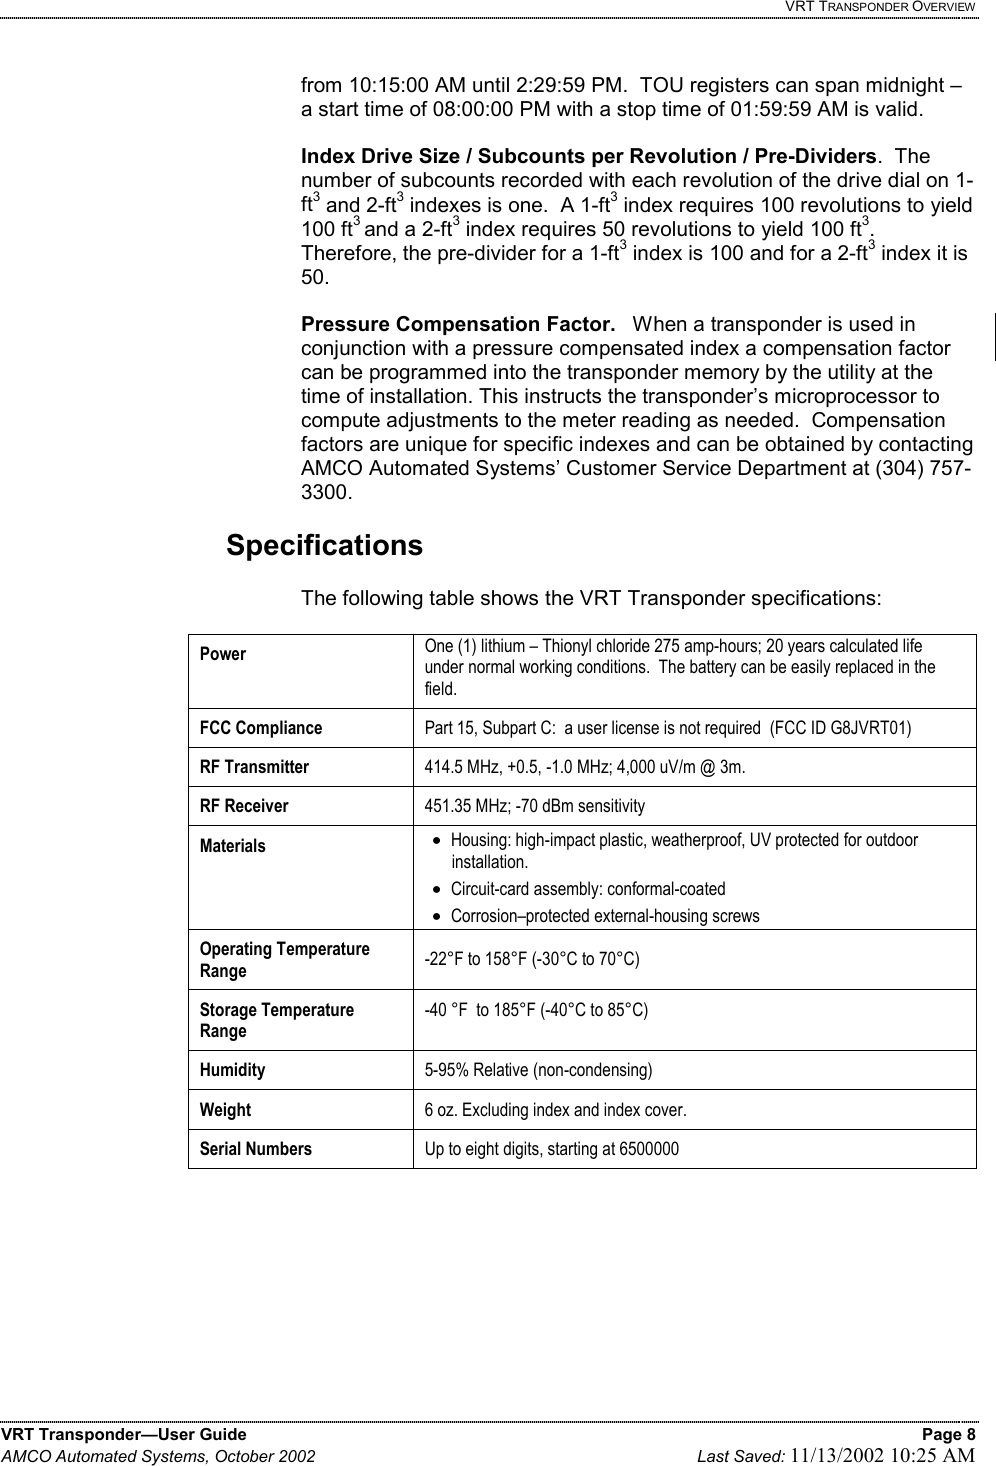   VRT TRANSPONDER OVERVIEW VRT Transponder—User Guide    Page 8 AMCO Automated Systems, October 2002    Last Saved: 11/13/2002 10:25 AM   from 10:15:00 AM until 2:29:59 PM.  TOU registers can span midnight – a start time of 08:00:00 PM with a stop time of 01:59:59 AM is valid.  Index Drive Size / Subcounts per Revolution / Pre-Dividers.  The number of subcounts recorded with each revolution of the drive dial on 1-ft3 and 2-ft3 indexes is one.  A 1-ft3 index requires 100 revolutions to yield 100 ft3 and a 2-ft3 index requires 50 revolutions to yield 100 ft3.    Therefore, the pre-divider for a 1-ft3 index is 100 and for a 2-ft3 index it is 50.    Pressure Compensation Factor.   When a transponder is used in conjunction with a pressure compensated index a compensation factor can be programmed into the transponder memory by the utility at the time of installation. This instructs the transponder’s microprocessor to compute adjustments to the meter reading as needed.  Compensation factors are unique for specific indexes and can be obtained by contacting AMCO Automated Systems’ Customer Service Department at (304) 757-3300.    Specifications  The following table shows the VRT Transponder specifications:  Power   One (1) lithium – Thionyl chloride 275 amp-hours; 20 years calculated life under normal working conditions.  The battery can be easily replaced in the field. FCC Compliance Part 15, Subpart C:  a user license is not required  (FCC ID G8JVRT01) RF Transmitter 414.5 MHz, +0.5, -1.0 MHz; 4,000 uV/m @ 3m.    RF Receiver  451.35 MHz; -70 dBm sensitivity Materials  •  Housing: high-impact plastic, weatherproof, UV protected for outdoor installation. •  Circuit-card assembly: conformal-coated •  Corrosion–protected external-housing screws Operating Temperature Range  -22°F to 158°F (-30°C to 70°C) Storage Temperature Range -40 °F  to 185°F (-40°C to 85°C) Humidity  5-95% Relative (non-condensing) Weight  6 oz. Excluding index and index cover. Serial Numbers  Up to eight digits, starting at 6500000     